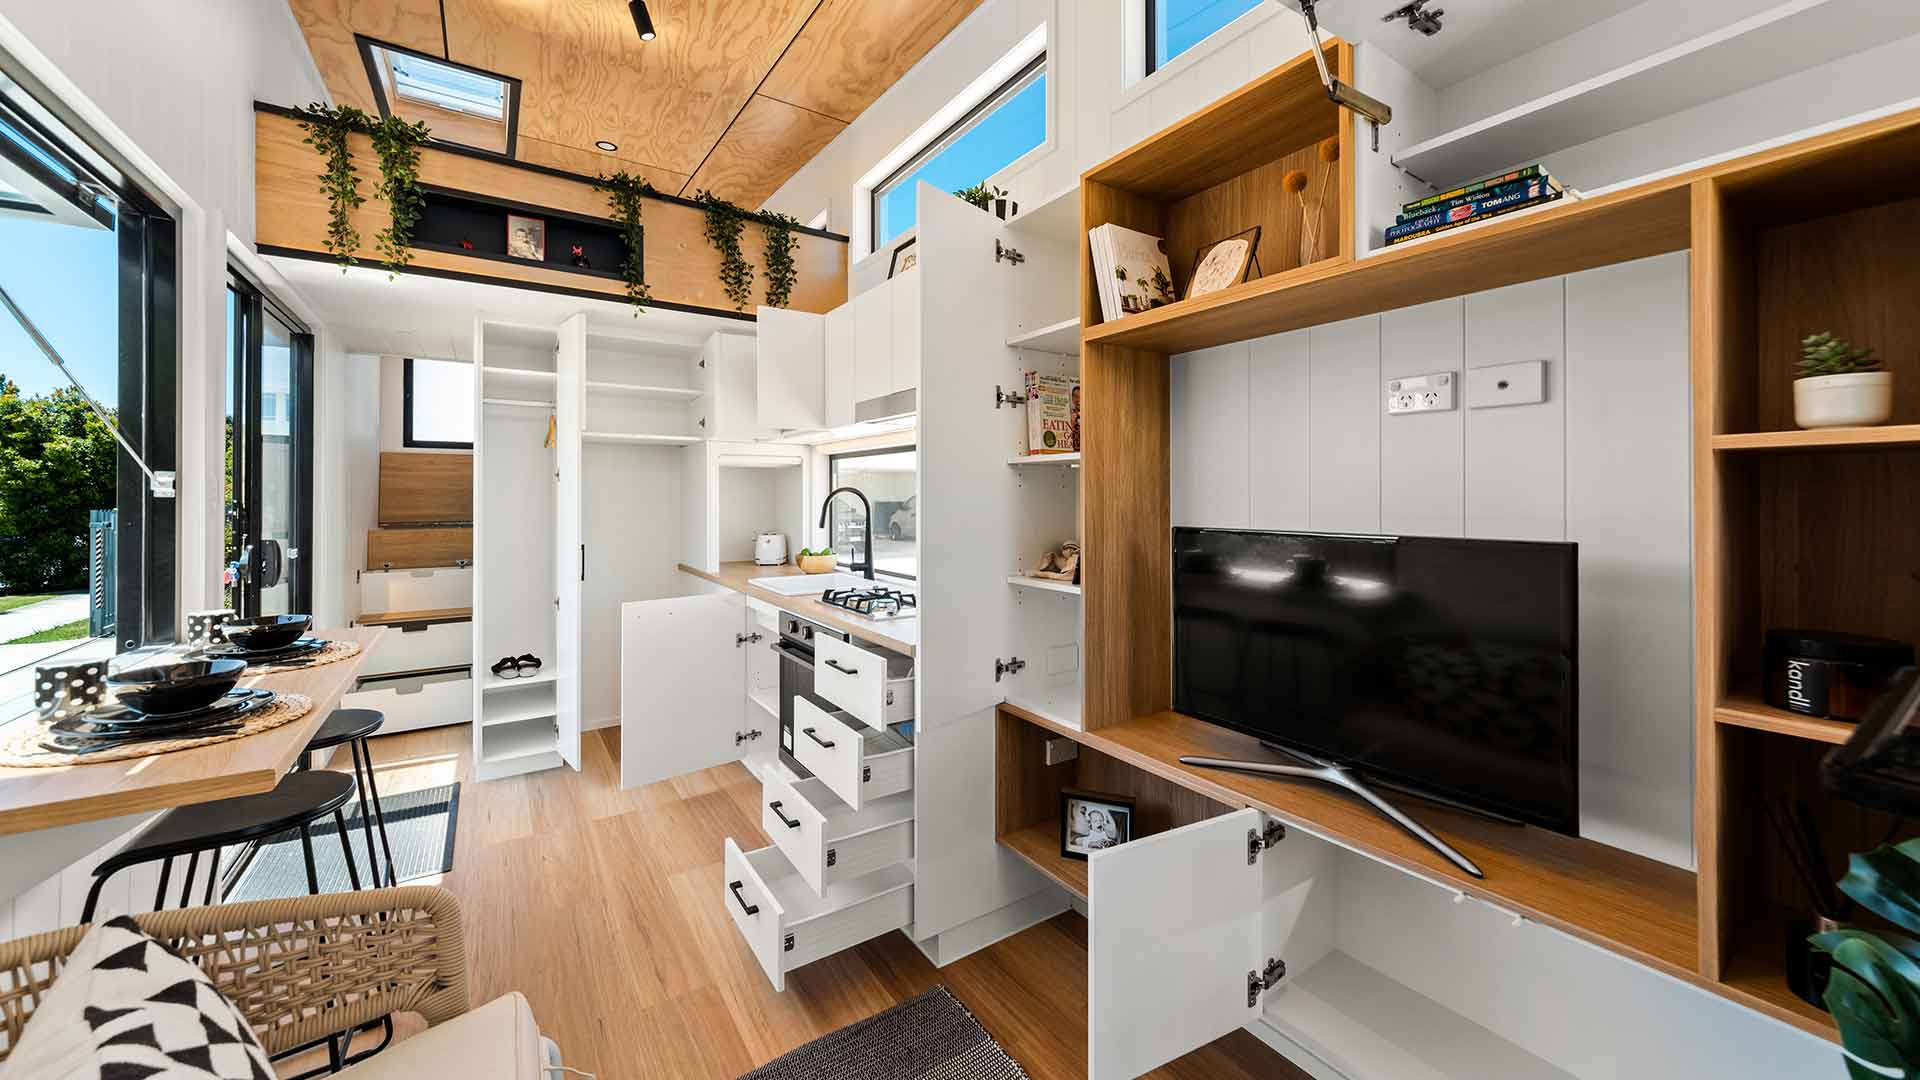 Our Favourite Tiny House Storage Solutions - Aussie Tiny Houses